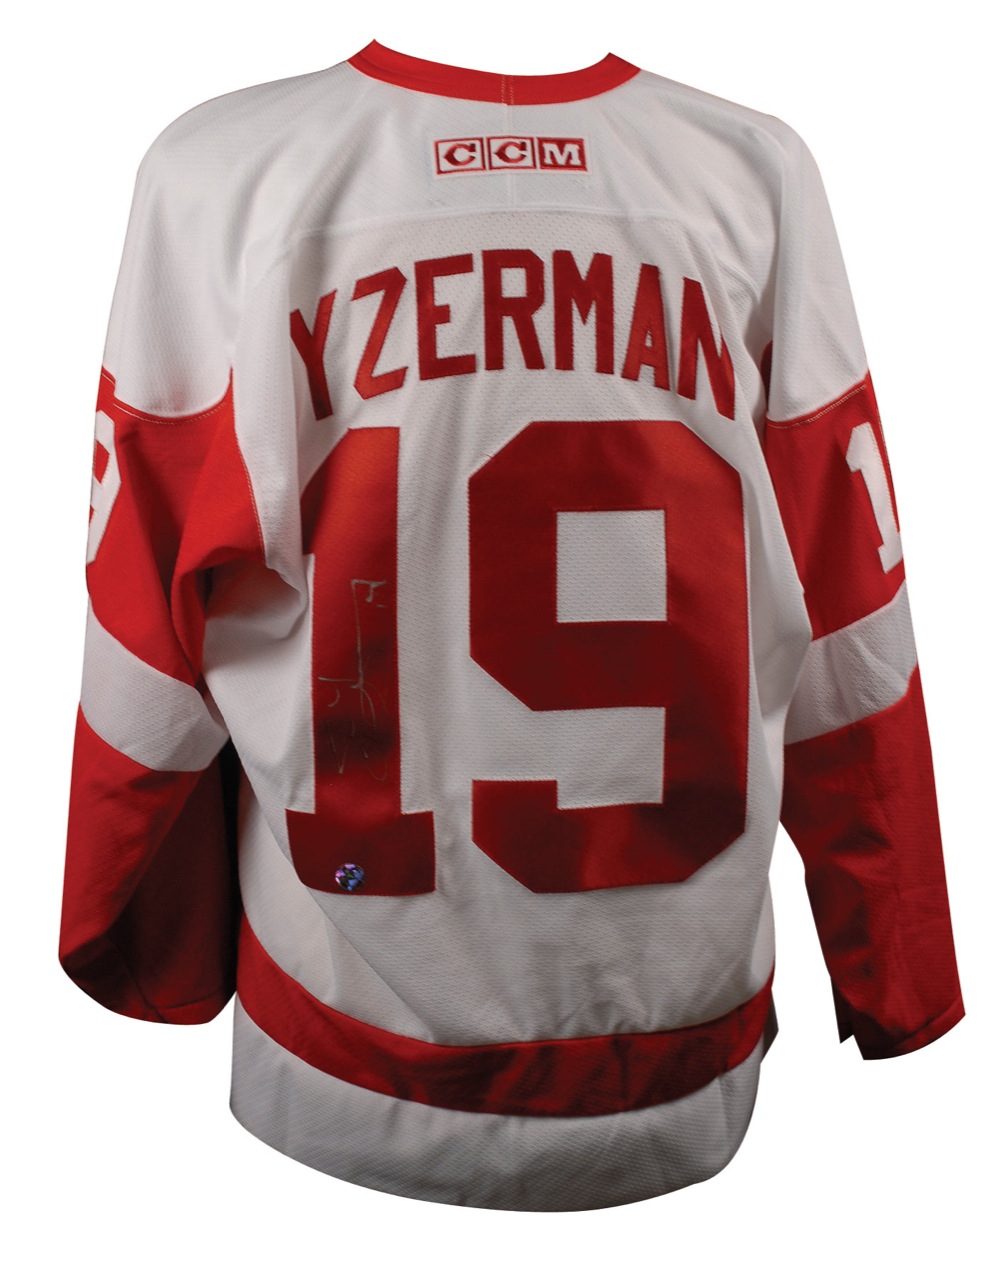 STEVE YZERMAN Signed White Detroit Red Wings Jersey - NHL Auctions